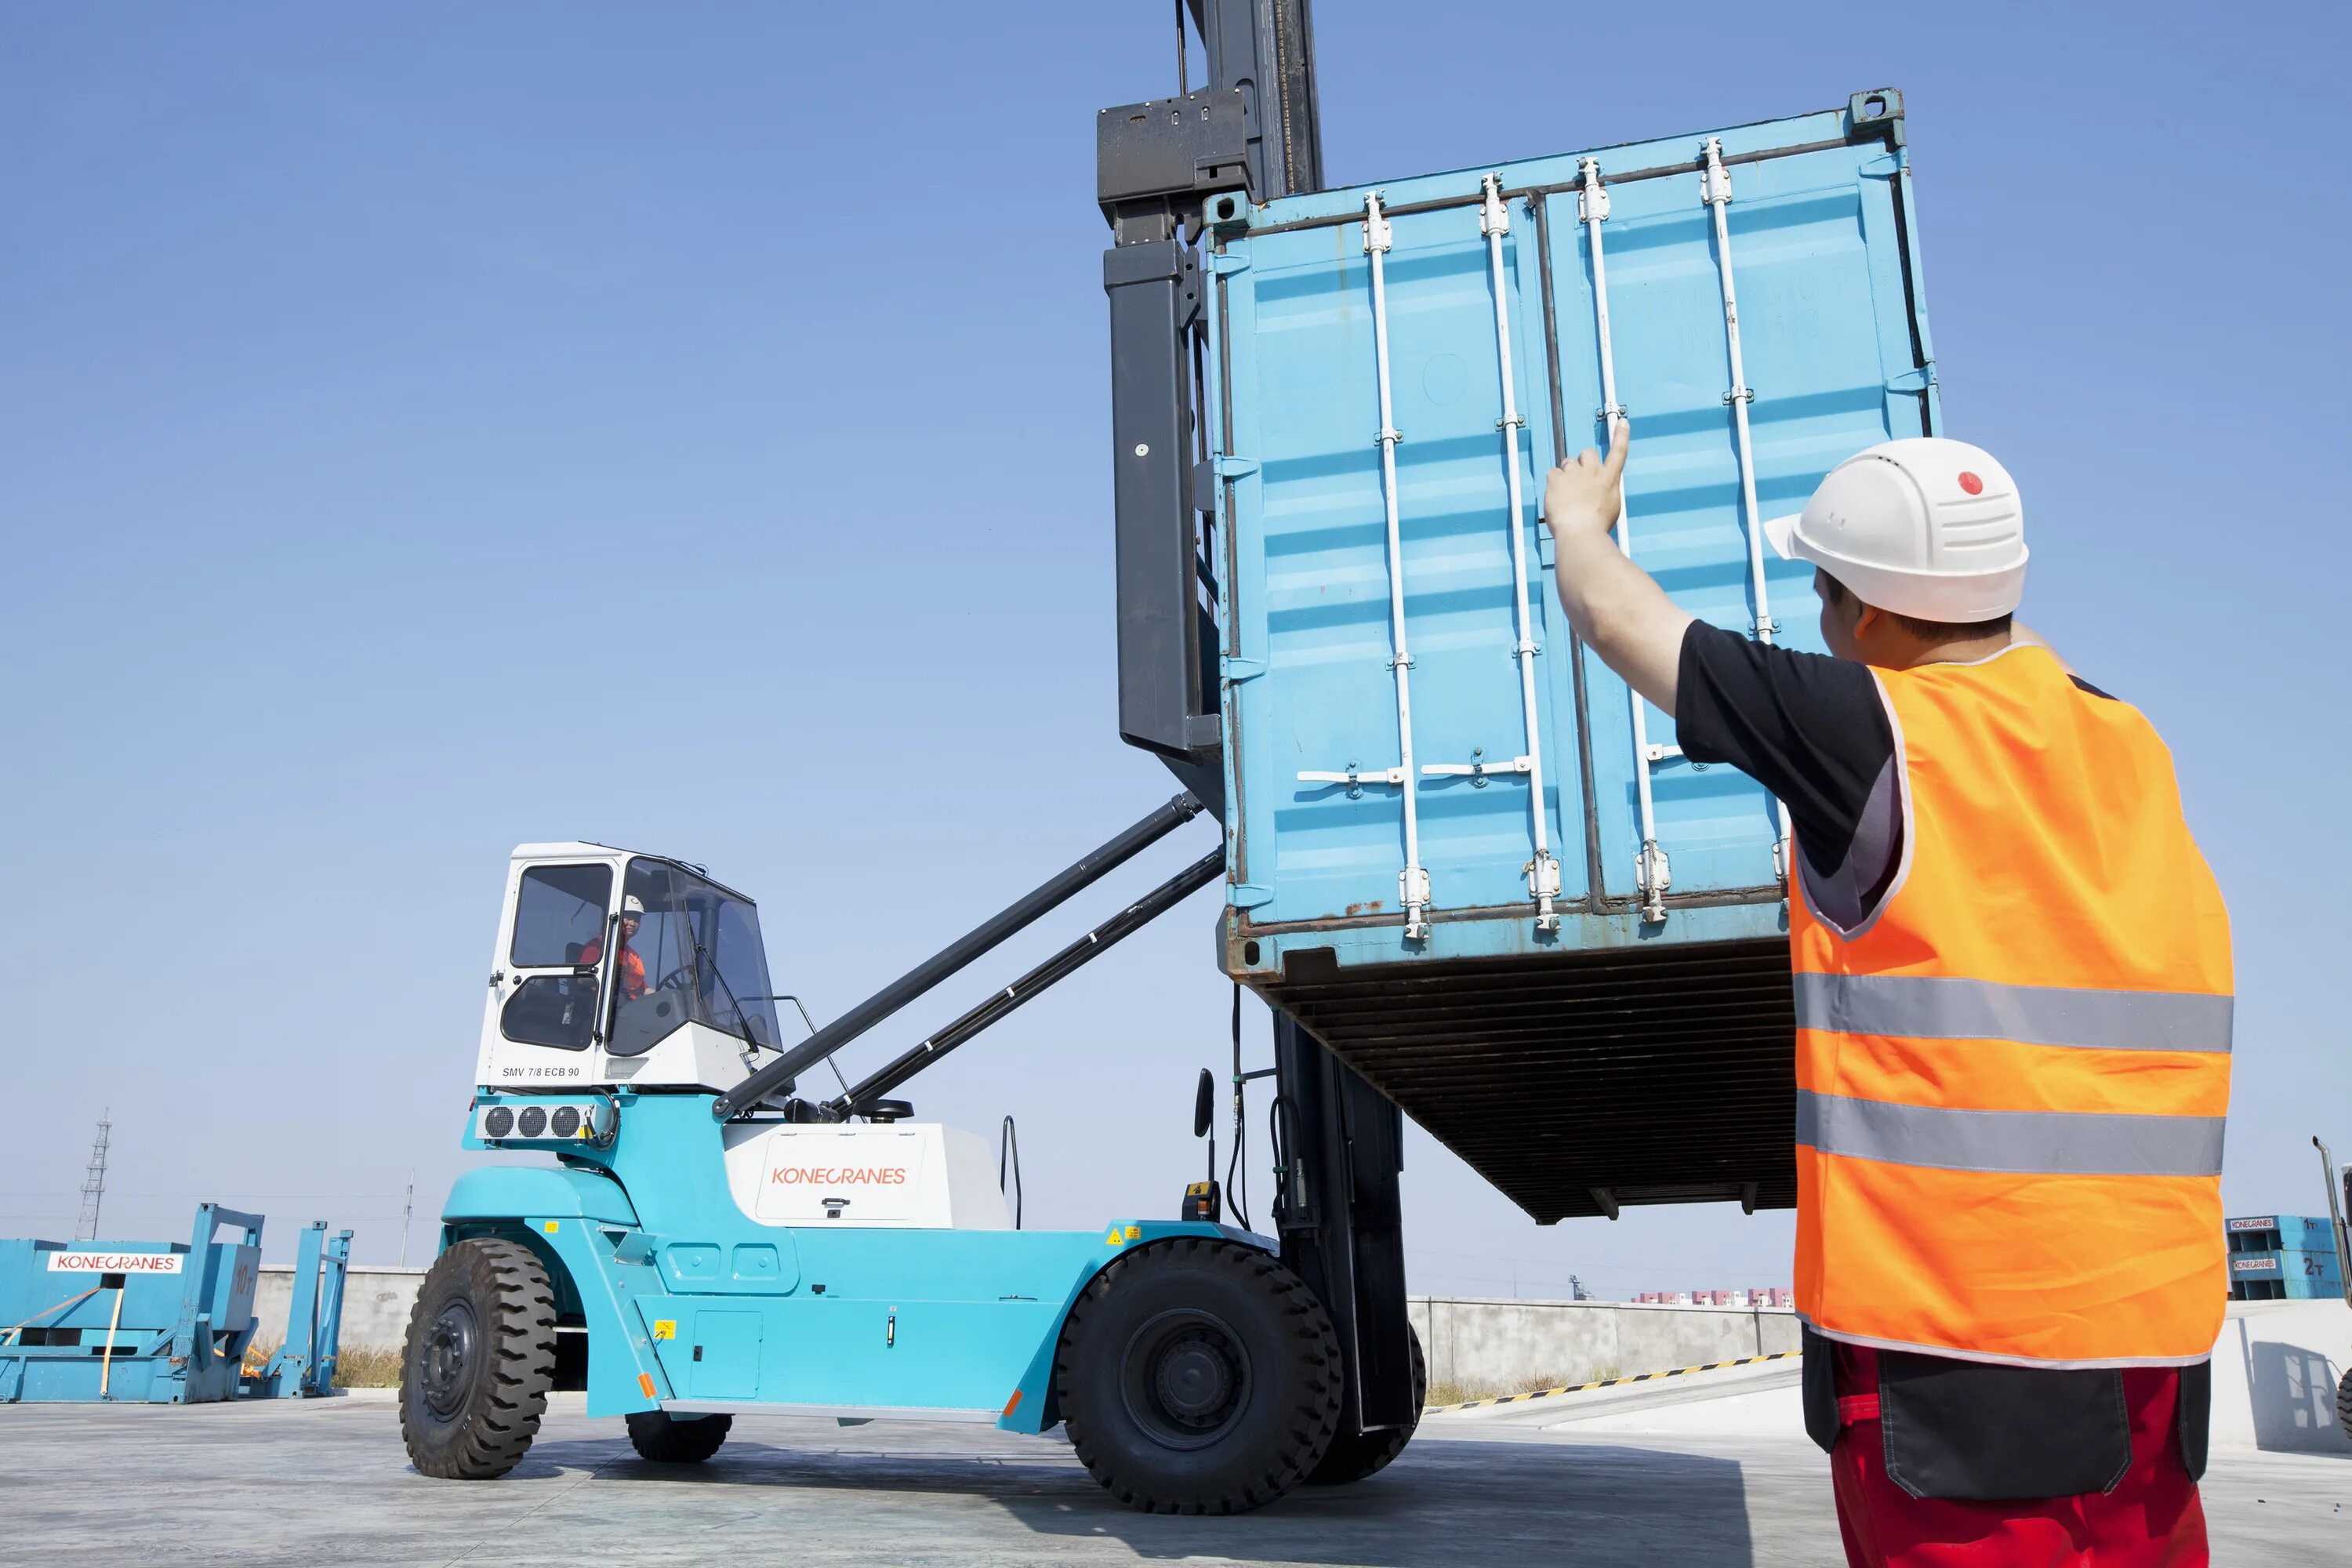 Lift Truck Ричстакер. Handling. Handling Equipment. Container with lifttruck. Handling out